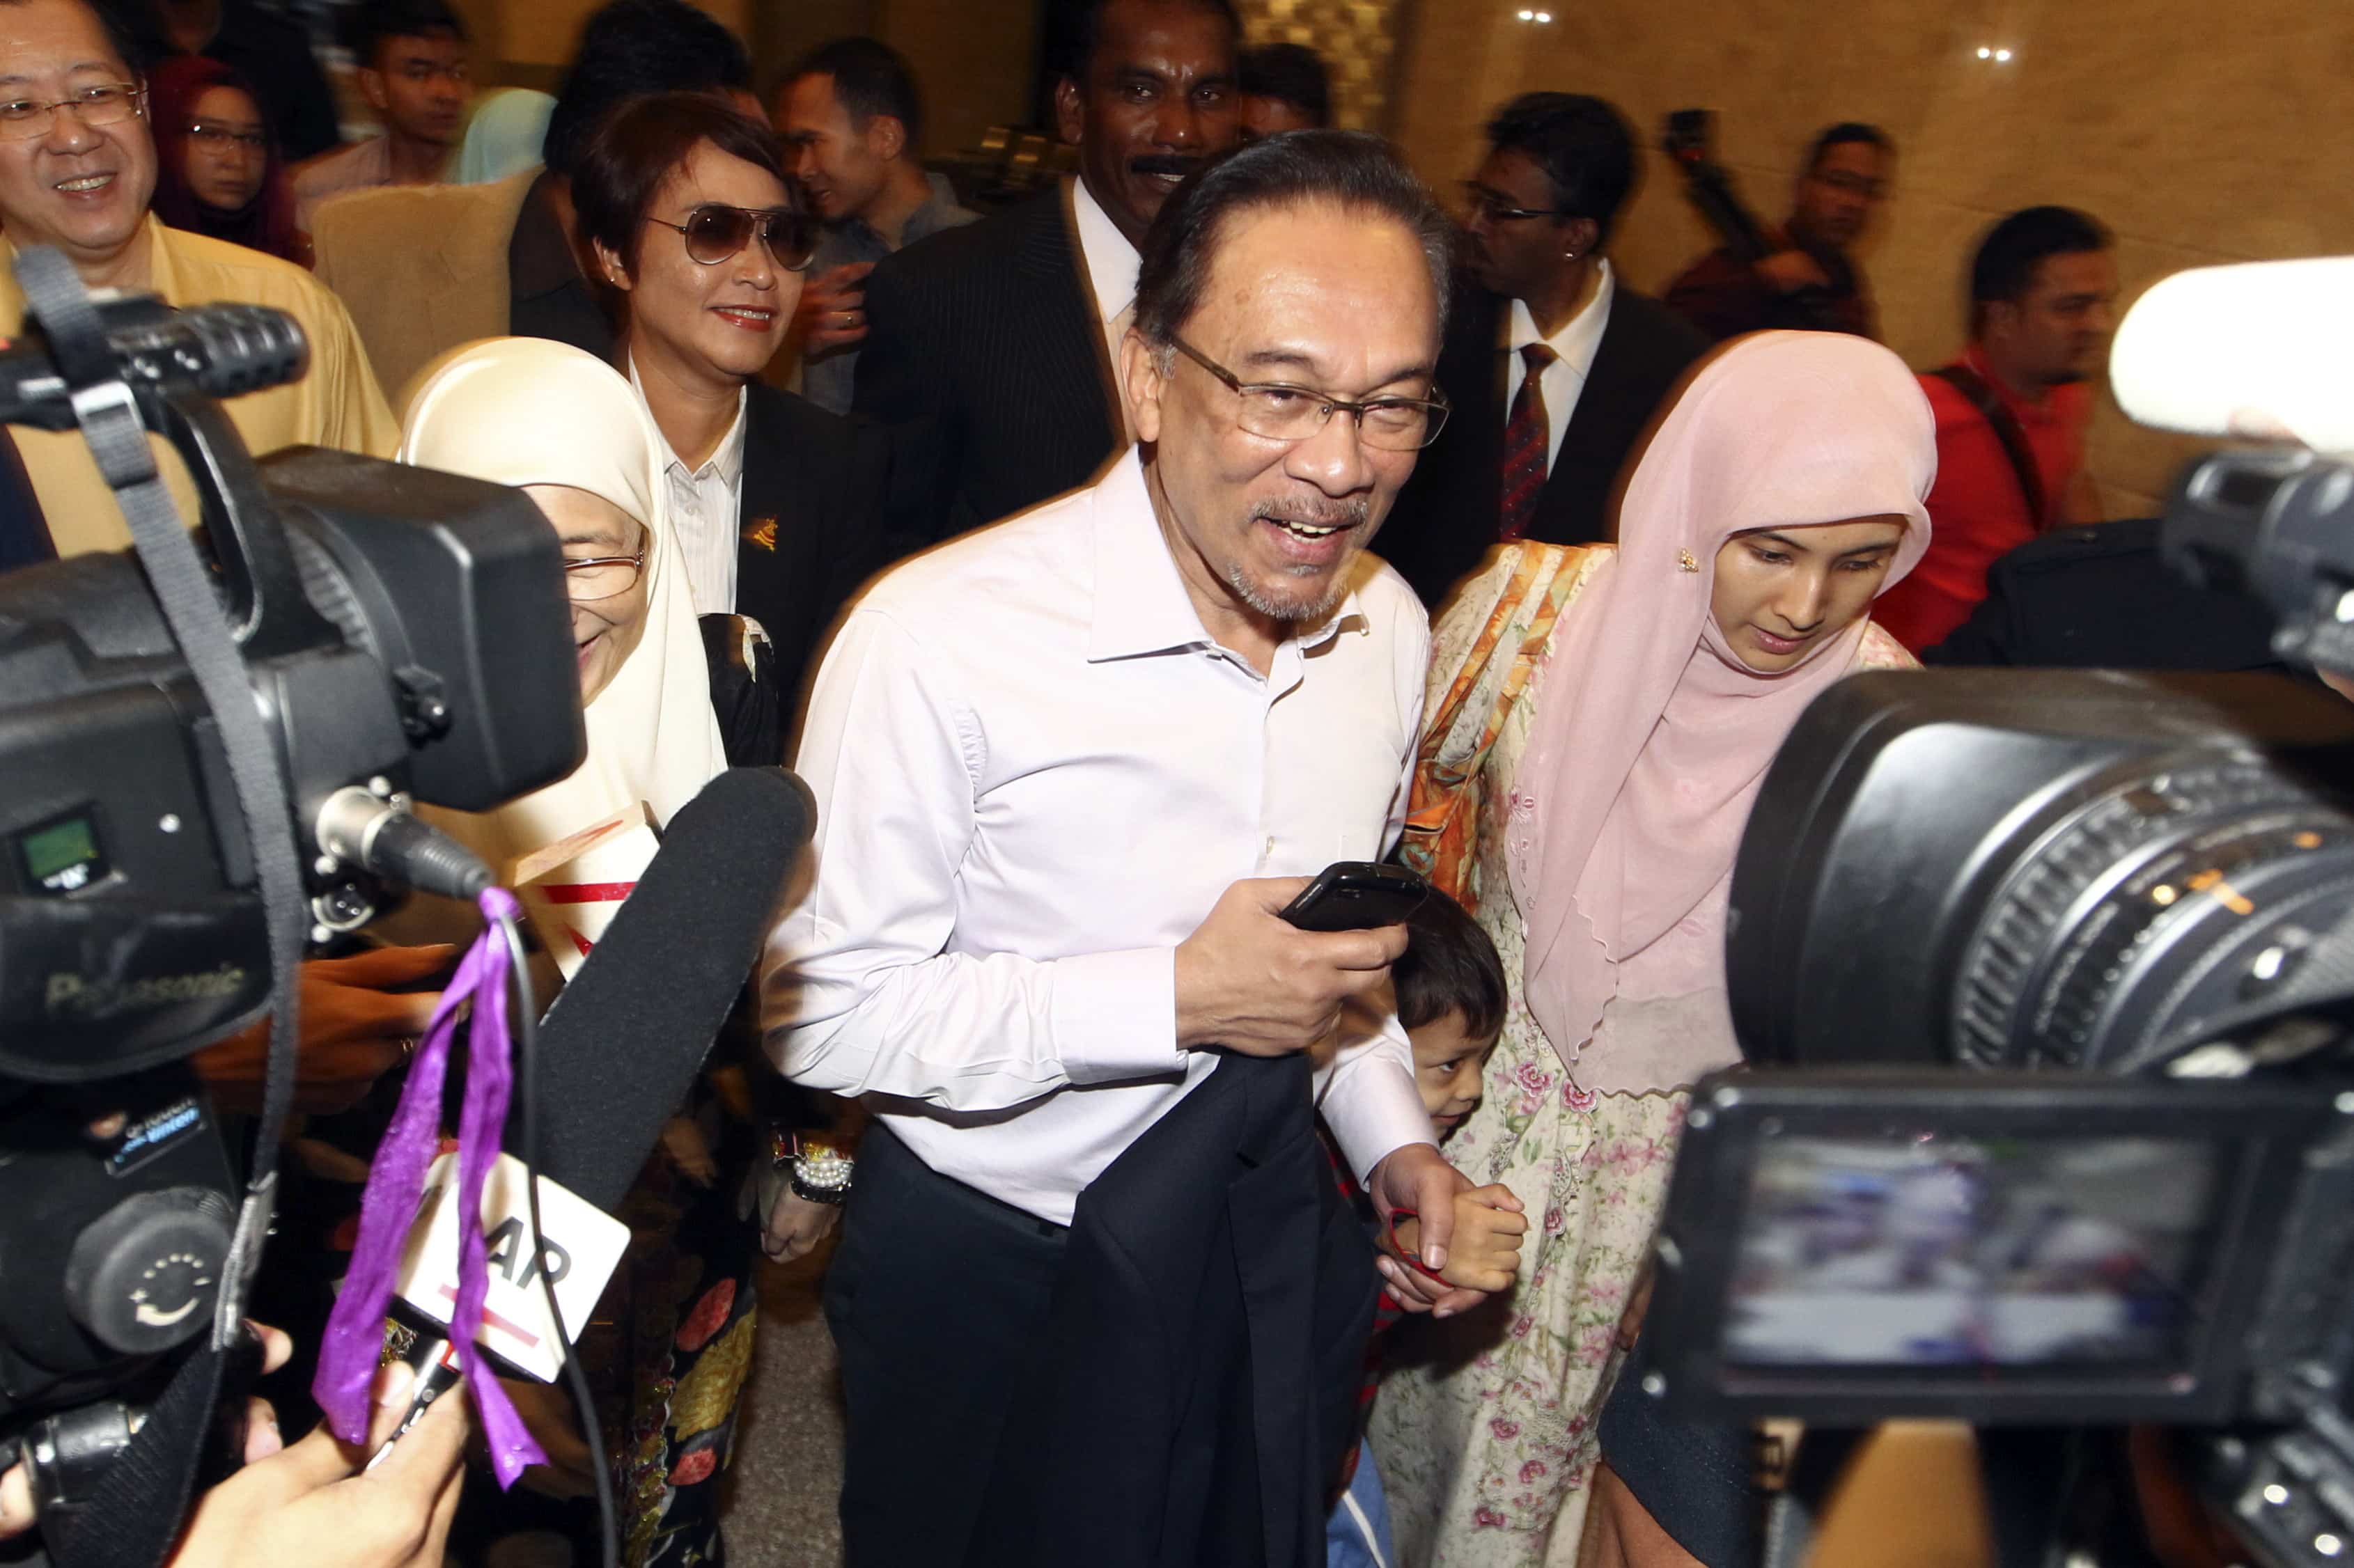 Malaysian opposition leader Anwar Ibrahim, center, arrives at the court house in Putrajaya, Malaysia, 10 February 2015, AP photo